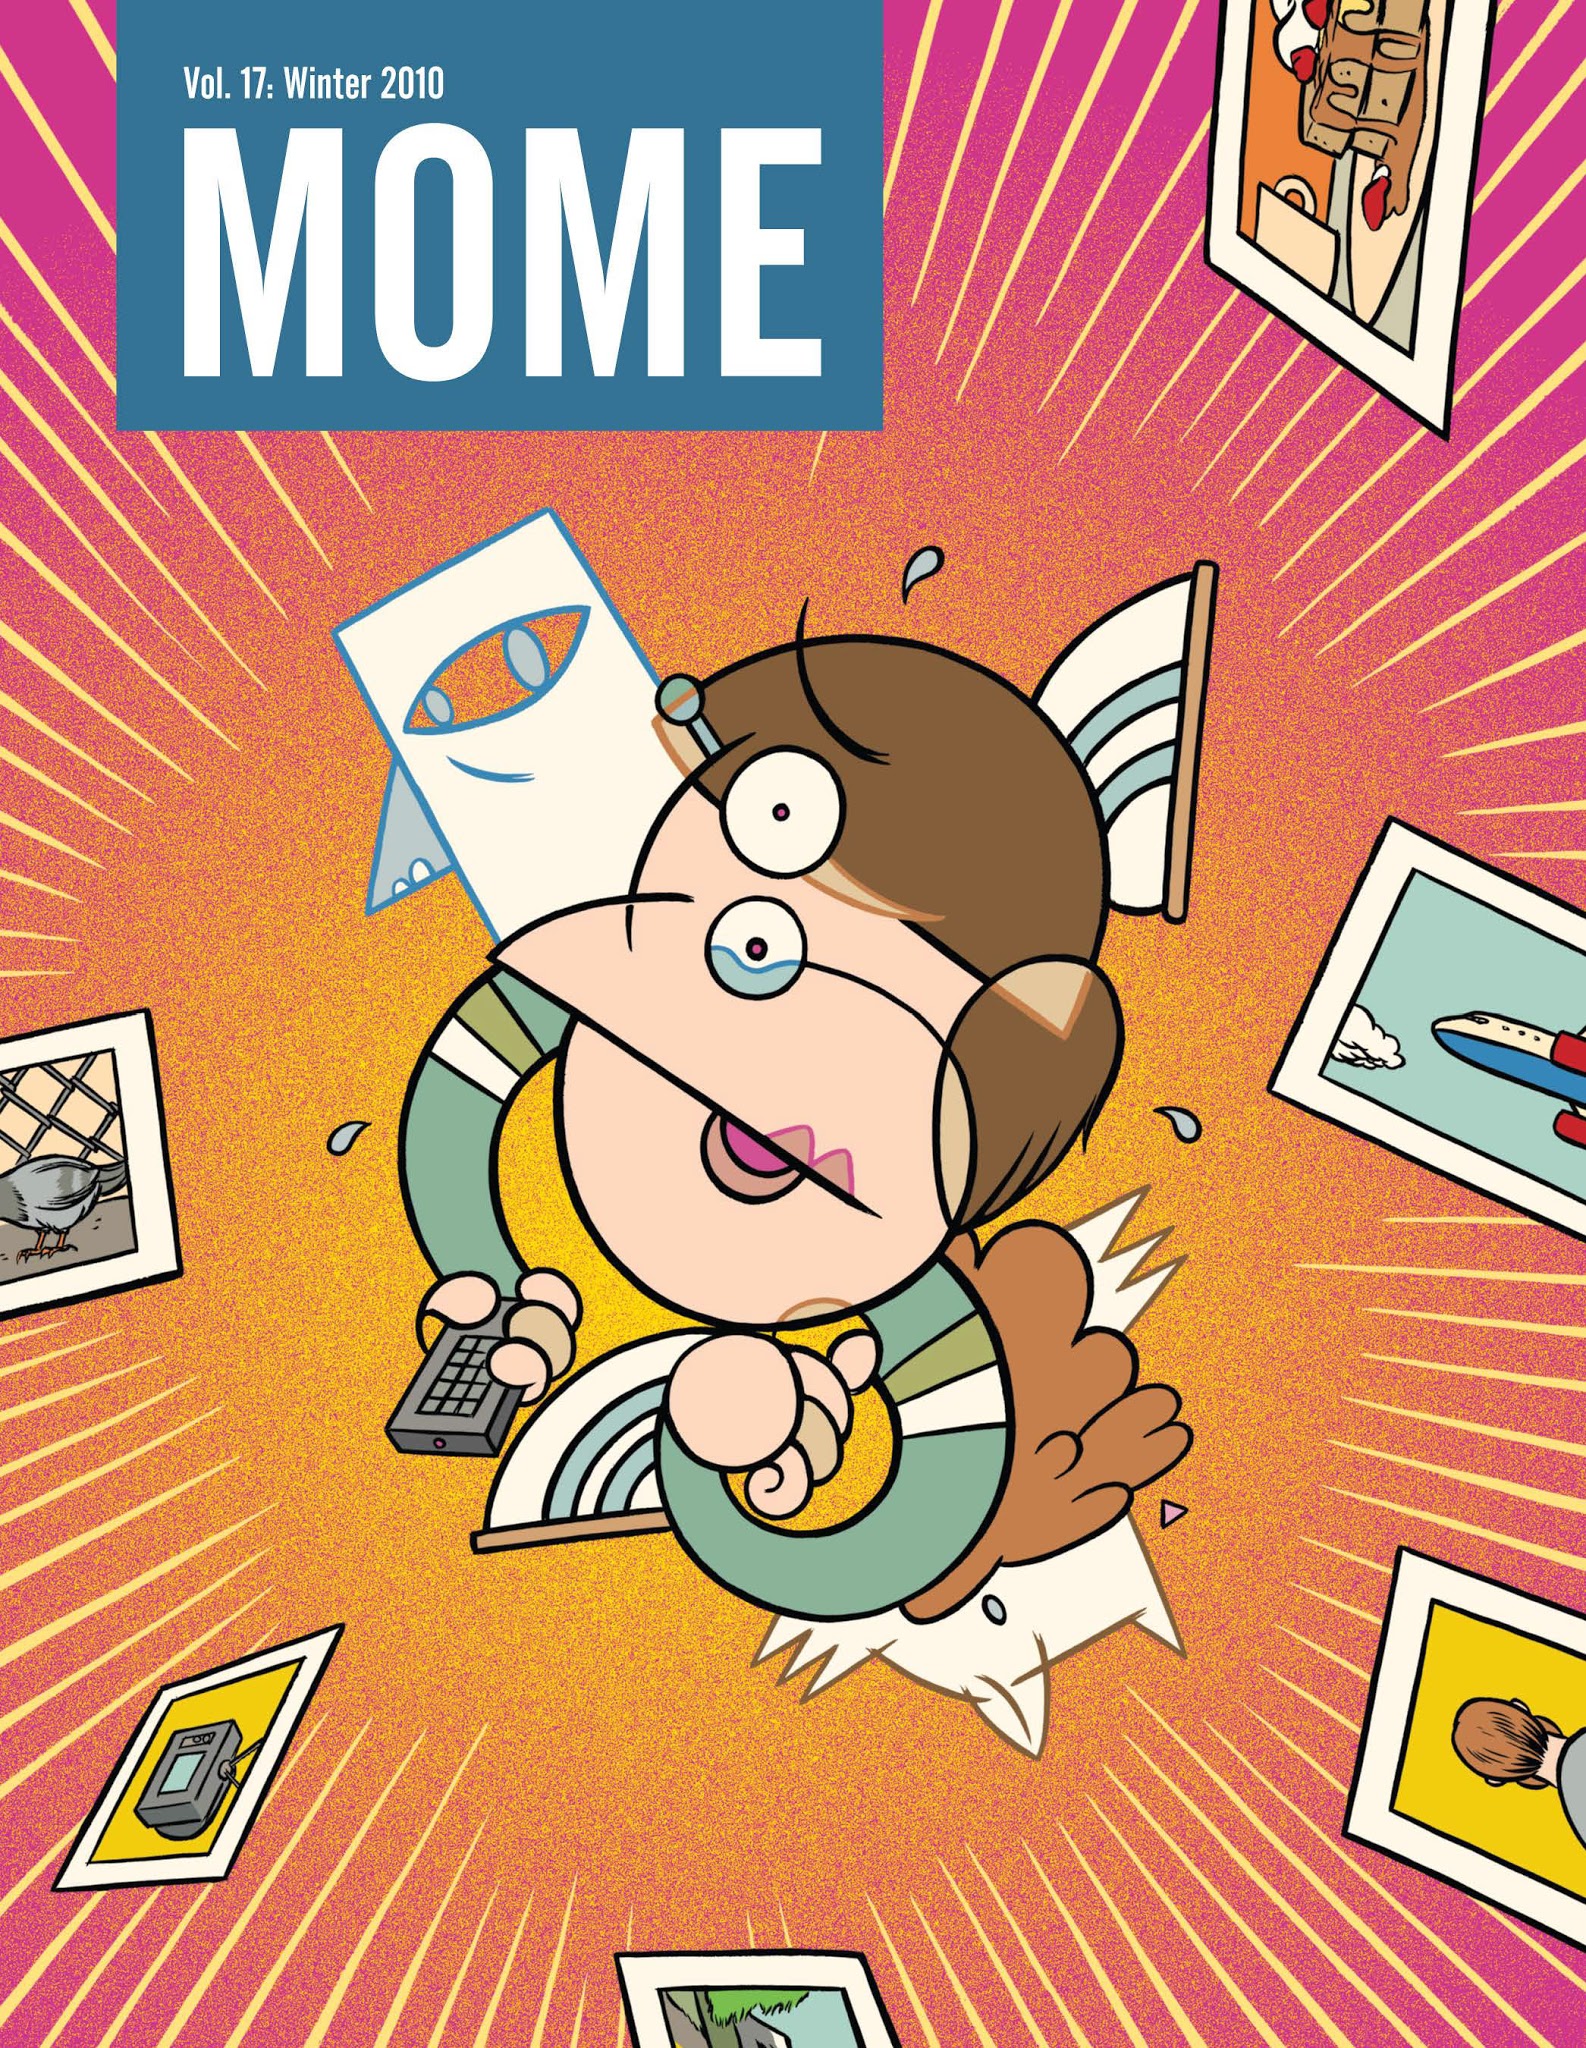 Read online Mome comic -  Issue # TPB 17 - 1